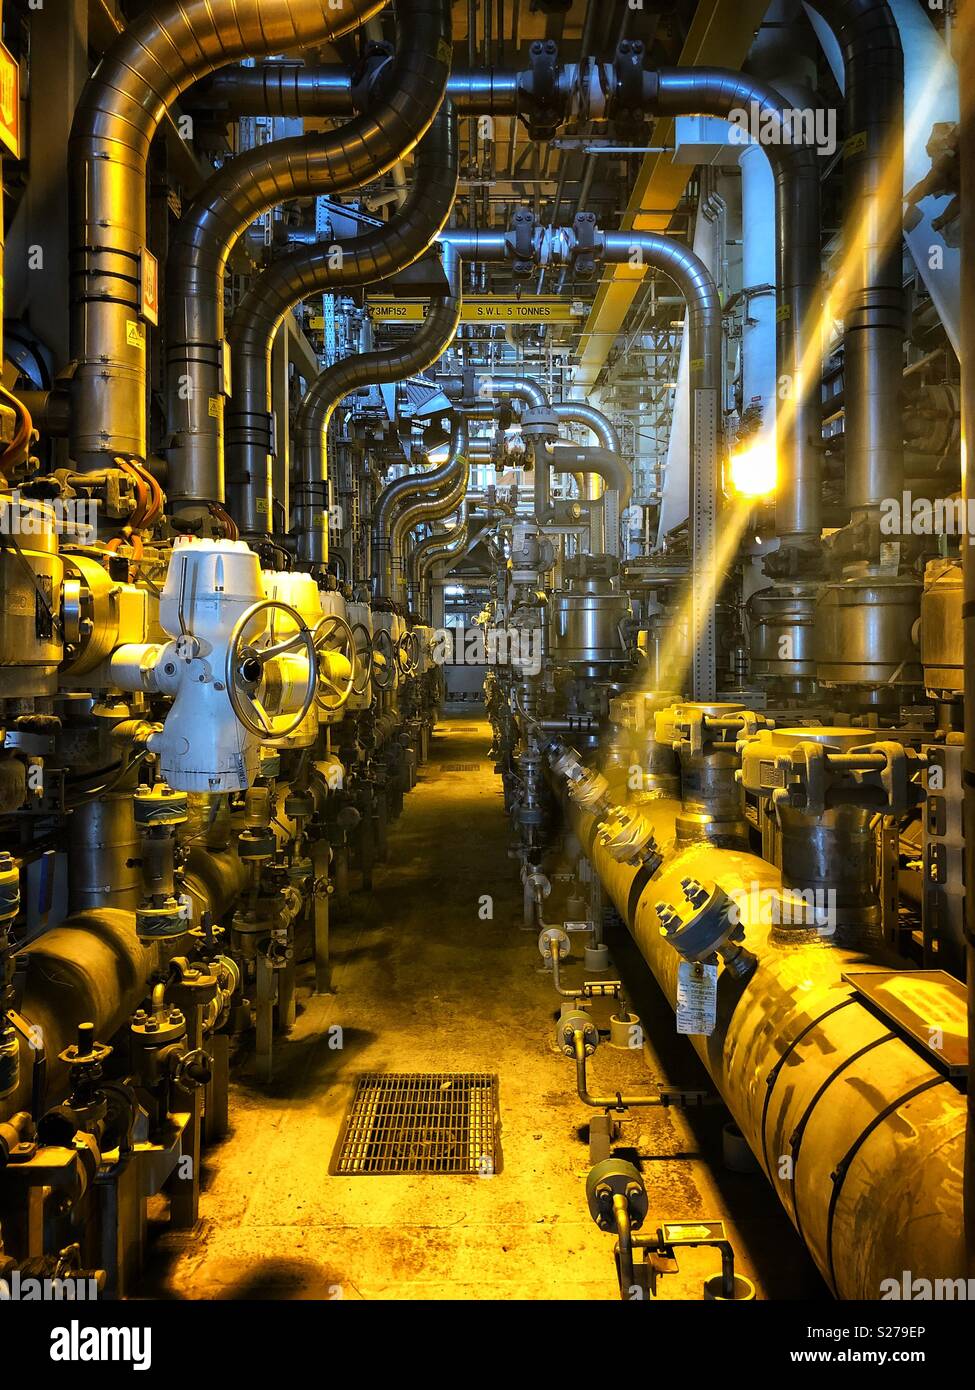 Oil rig pipe work. Credit: Lee Ramsden / Alamy Stock Photo